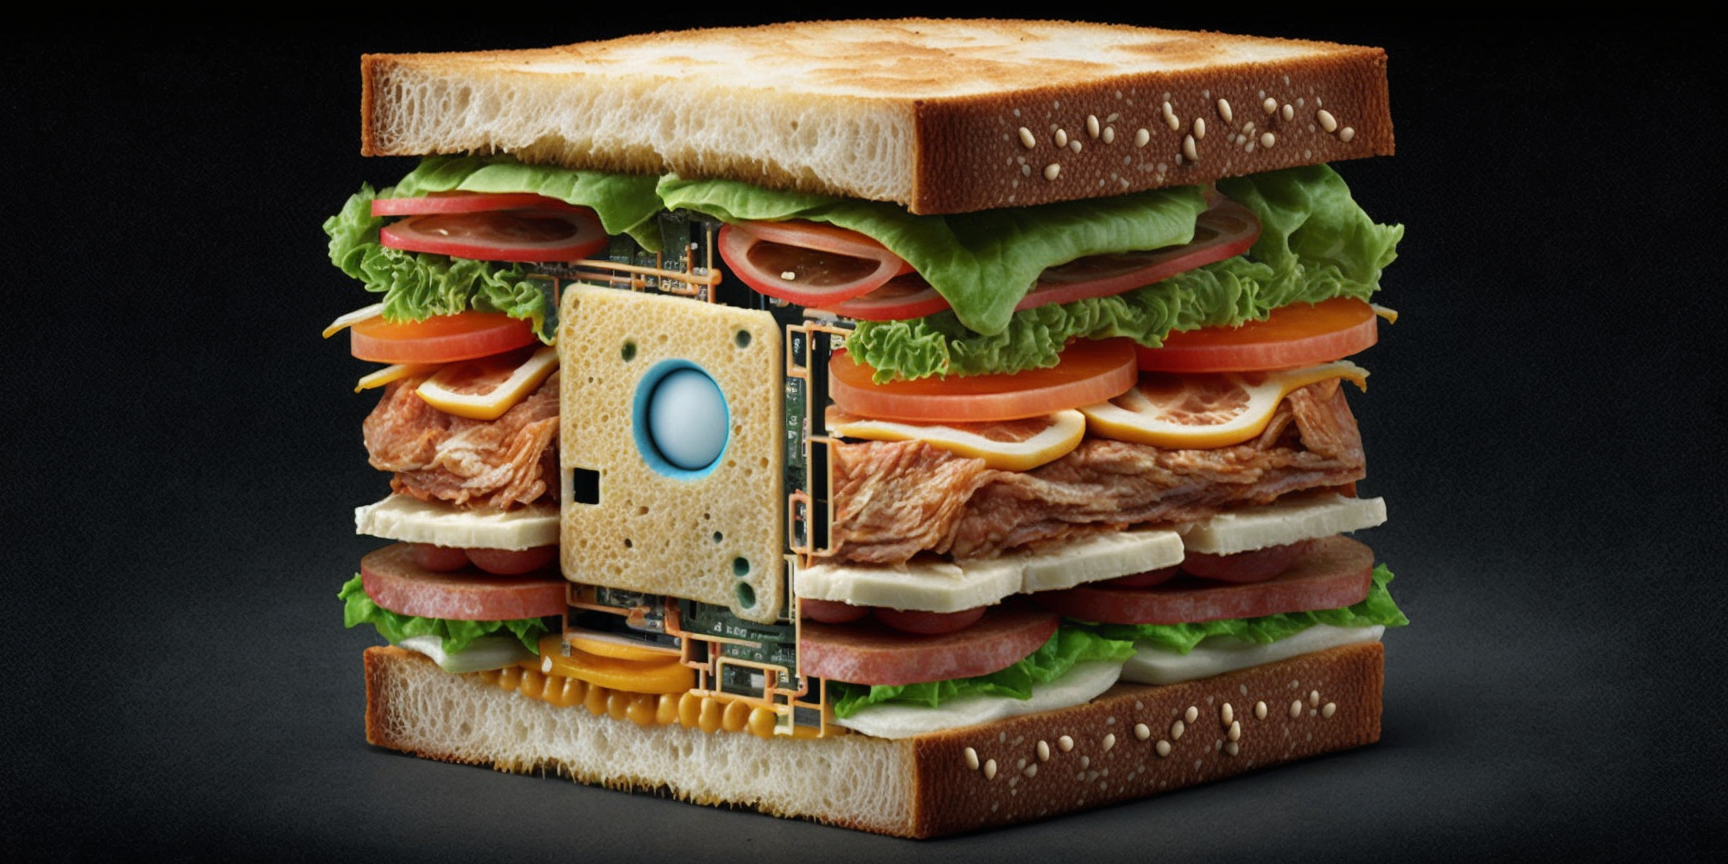 Image of an AI Sandwich as imagined by Midjourney